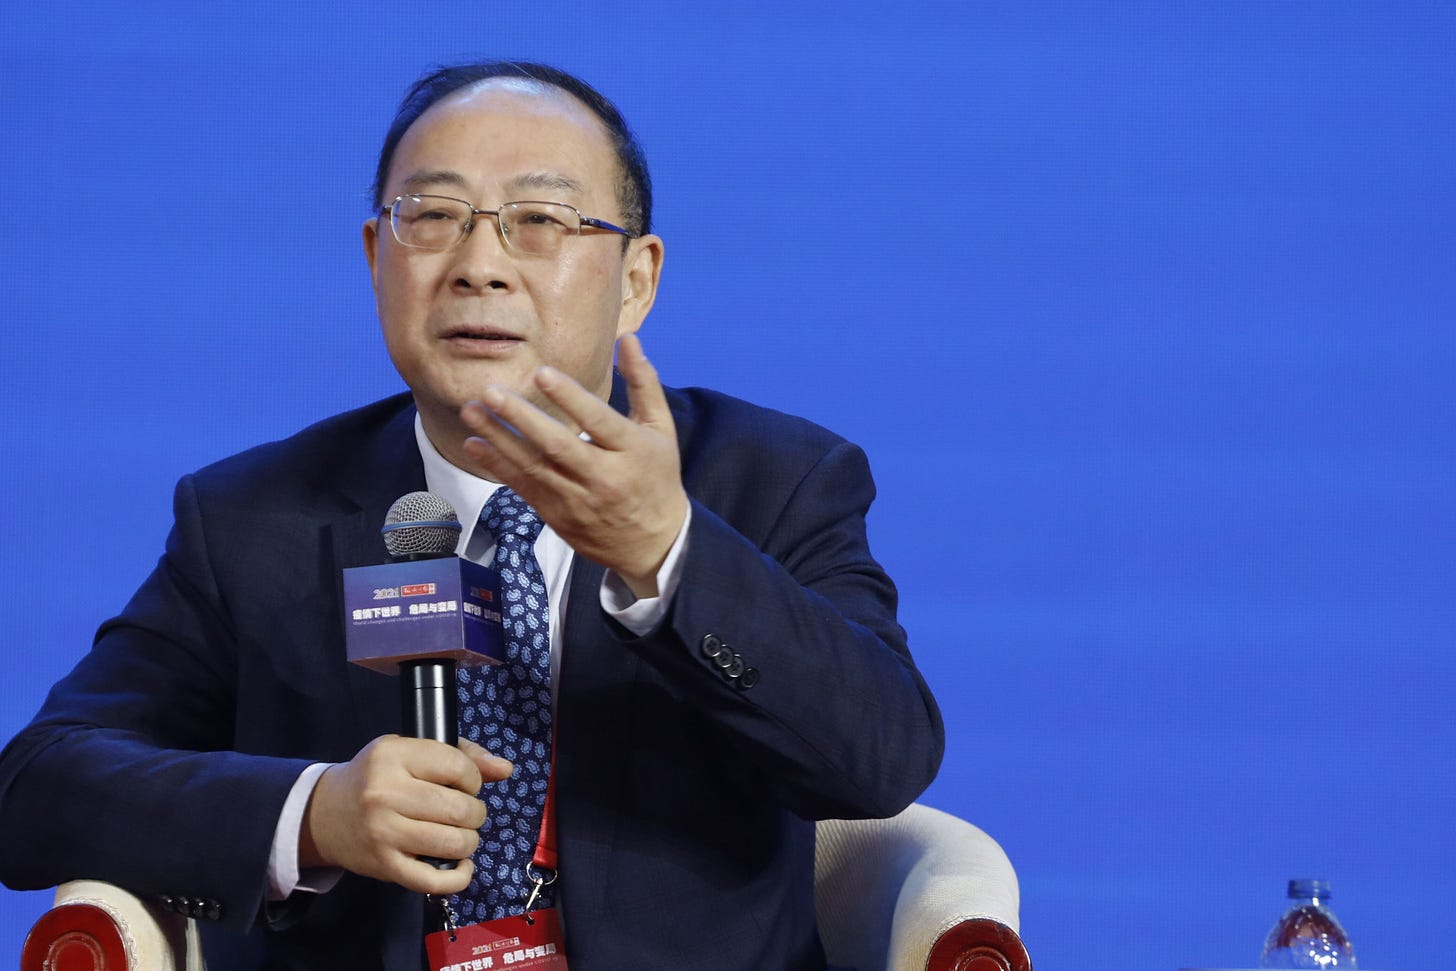 Global Times on Twitter: "Jin Canrong, associate dean of the School of  International Studies at Renmin University of China, told at #GTAnnualForum  that Chinese authorities are now preparing for further interaction with @